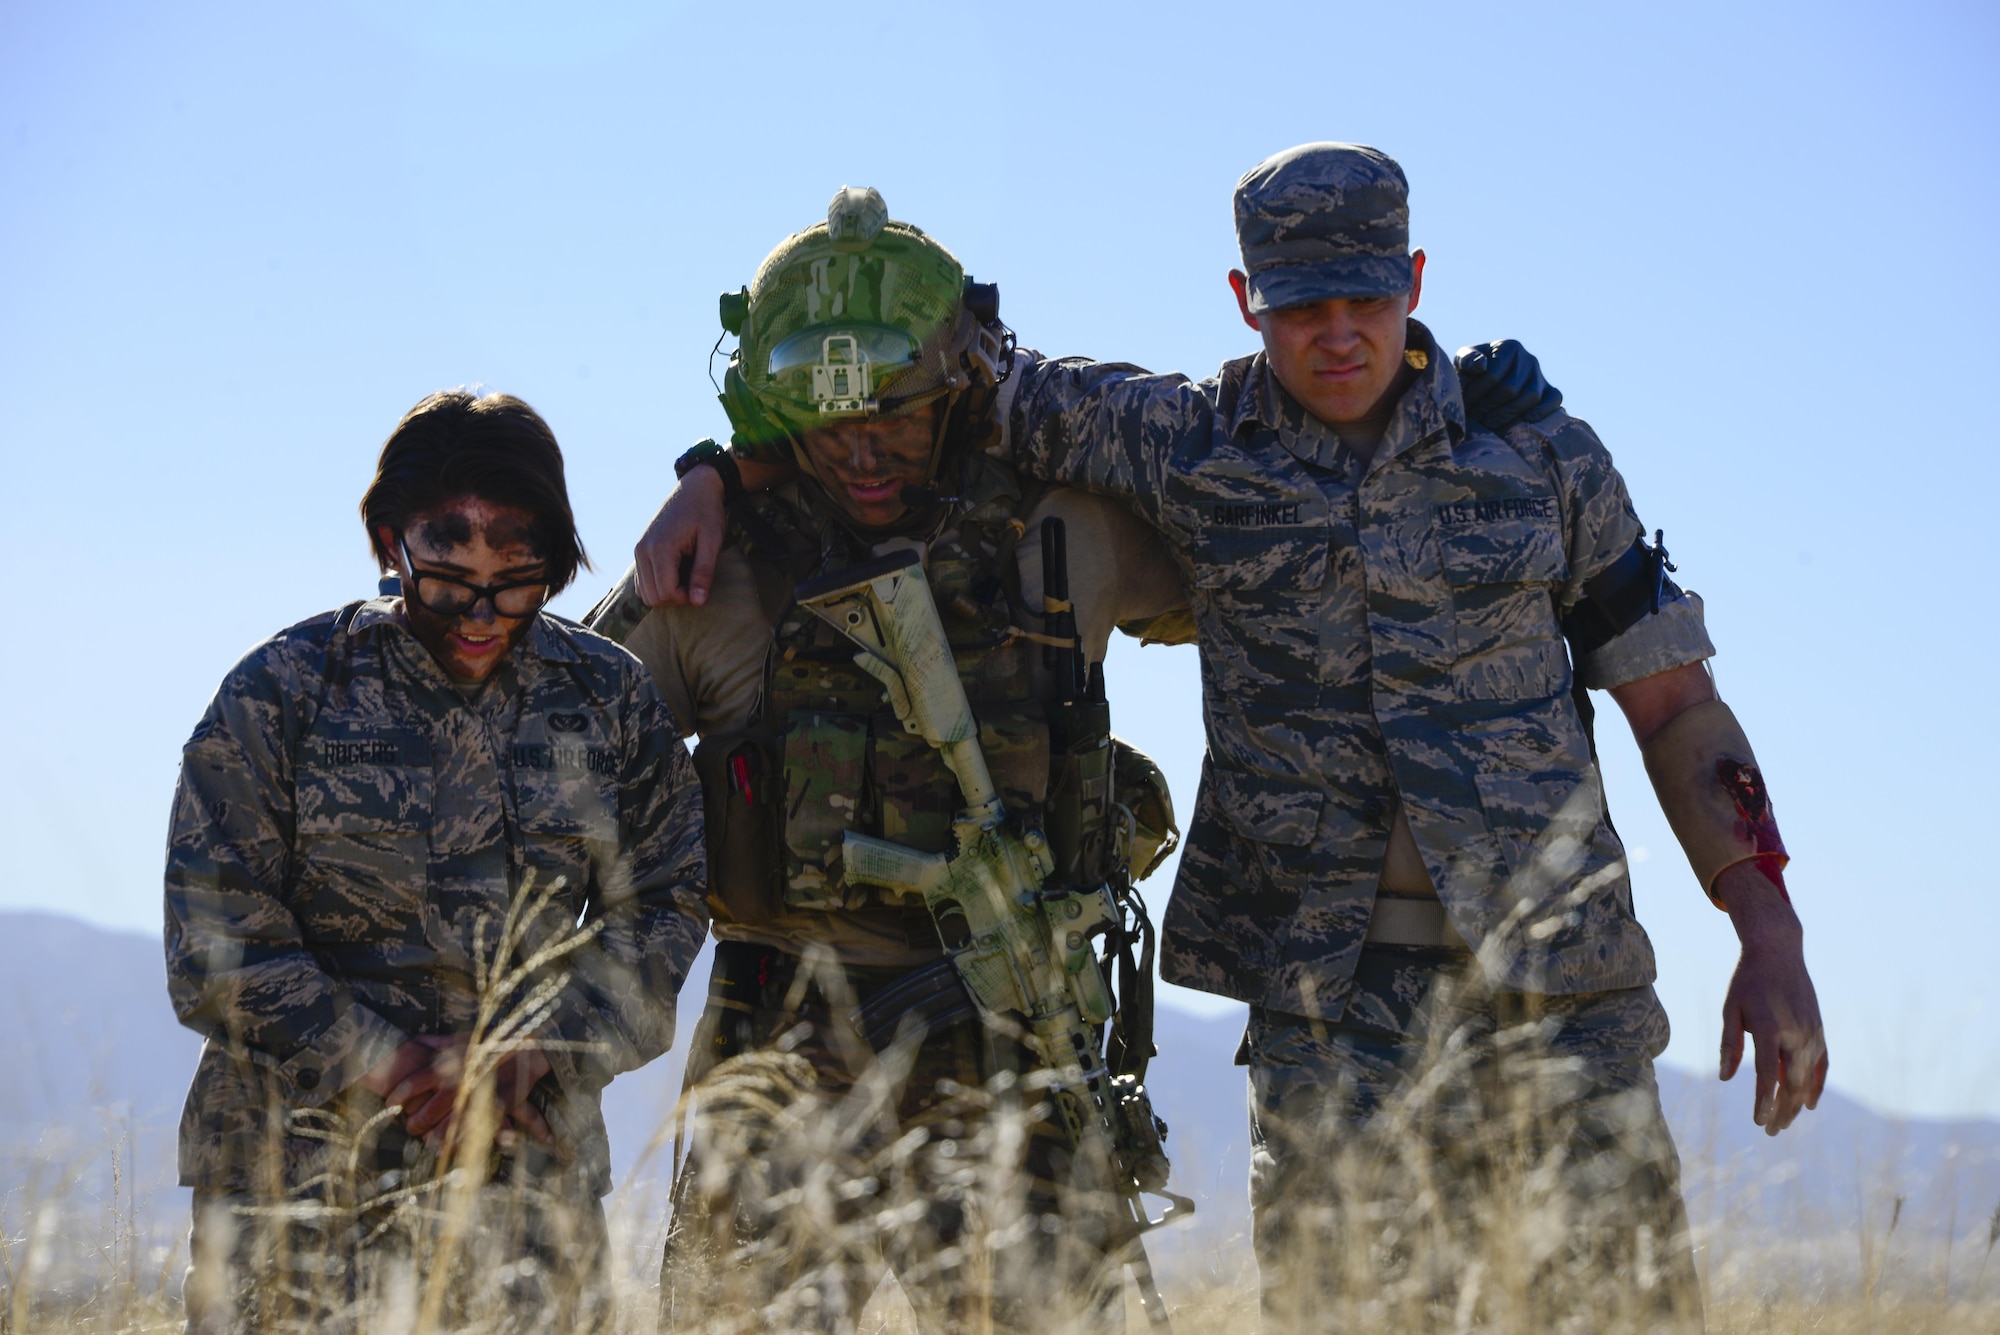 A U.S. Air Force pararescueman assigned to the 48th Rescue Squadron assists patients to a casualty collection point during a mass casualty exercise at Fort Huachuca, Ariz., Dec. 8, 2016. Pararescuemen were dispatched and air dropped over the site of a simulated plane crash, where they sifted through the wreckage and treated survivors. (U.S. Air Force photo by Senior Airman Betty R. Chevalier)